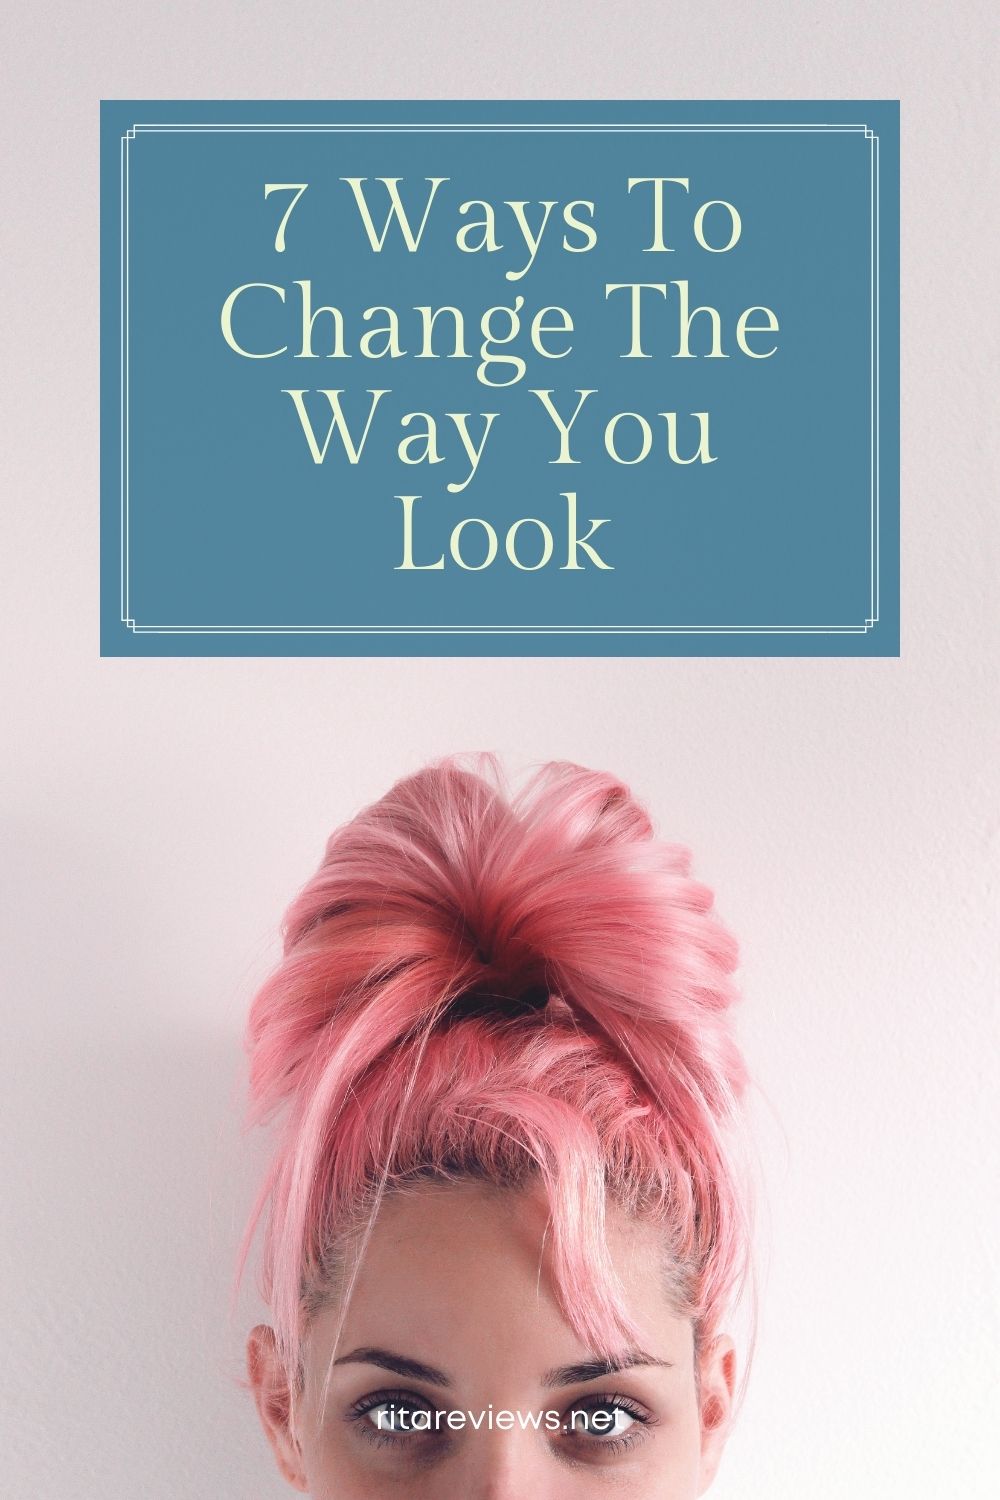 7 Ways To Change The Way You Look